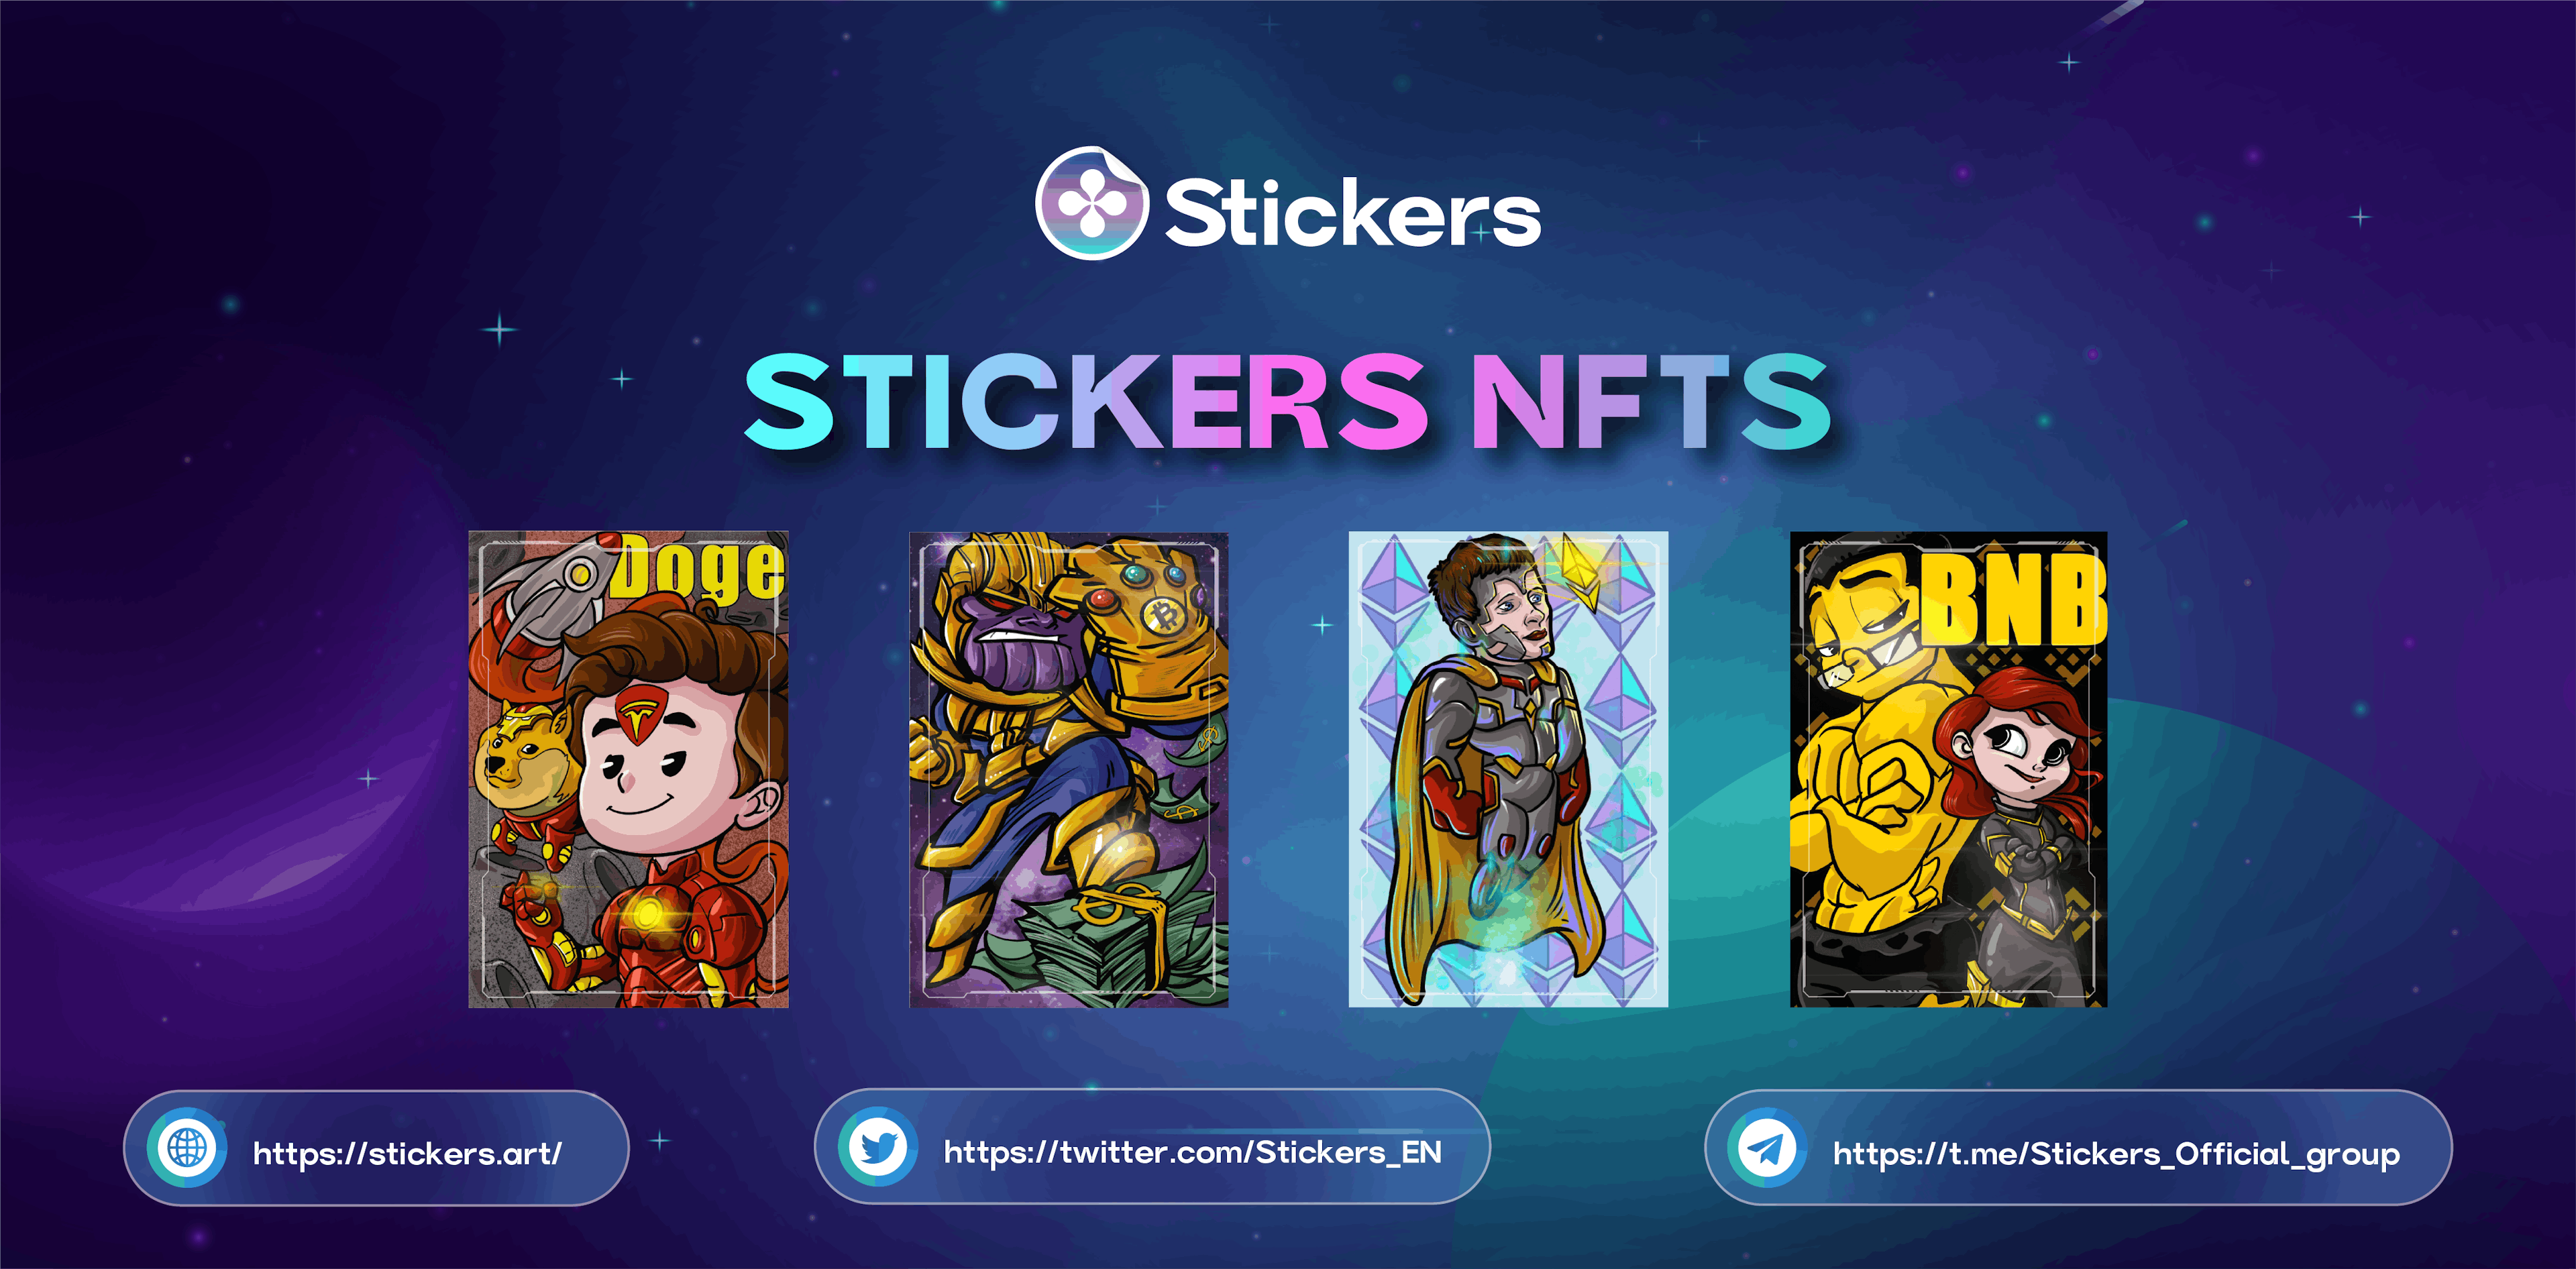 featured image - Stickers NFTs Sold on Secondary Markets for as High as 50,000 USDT